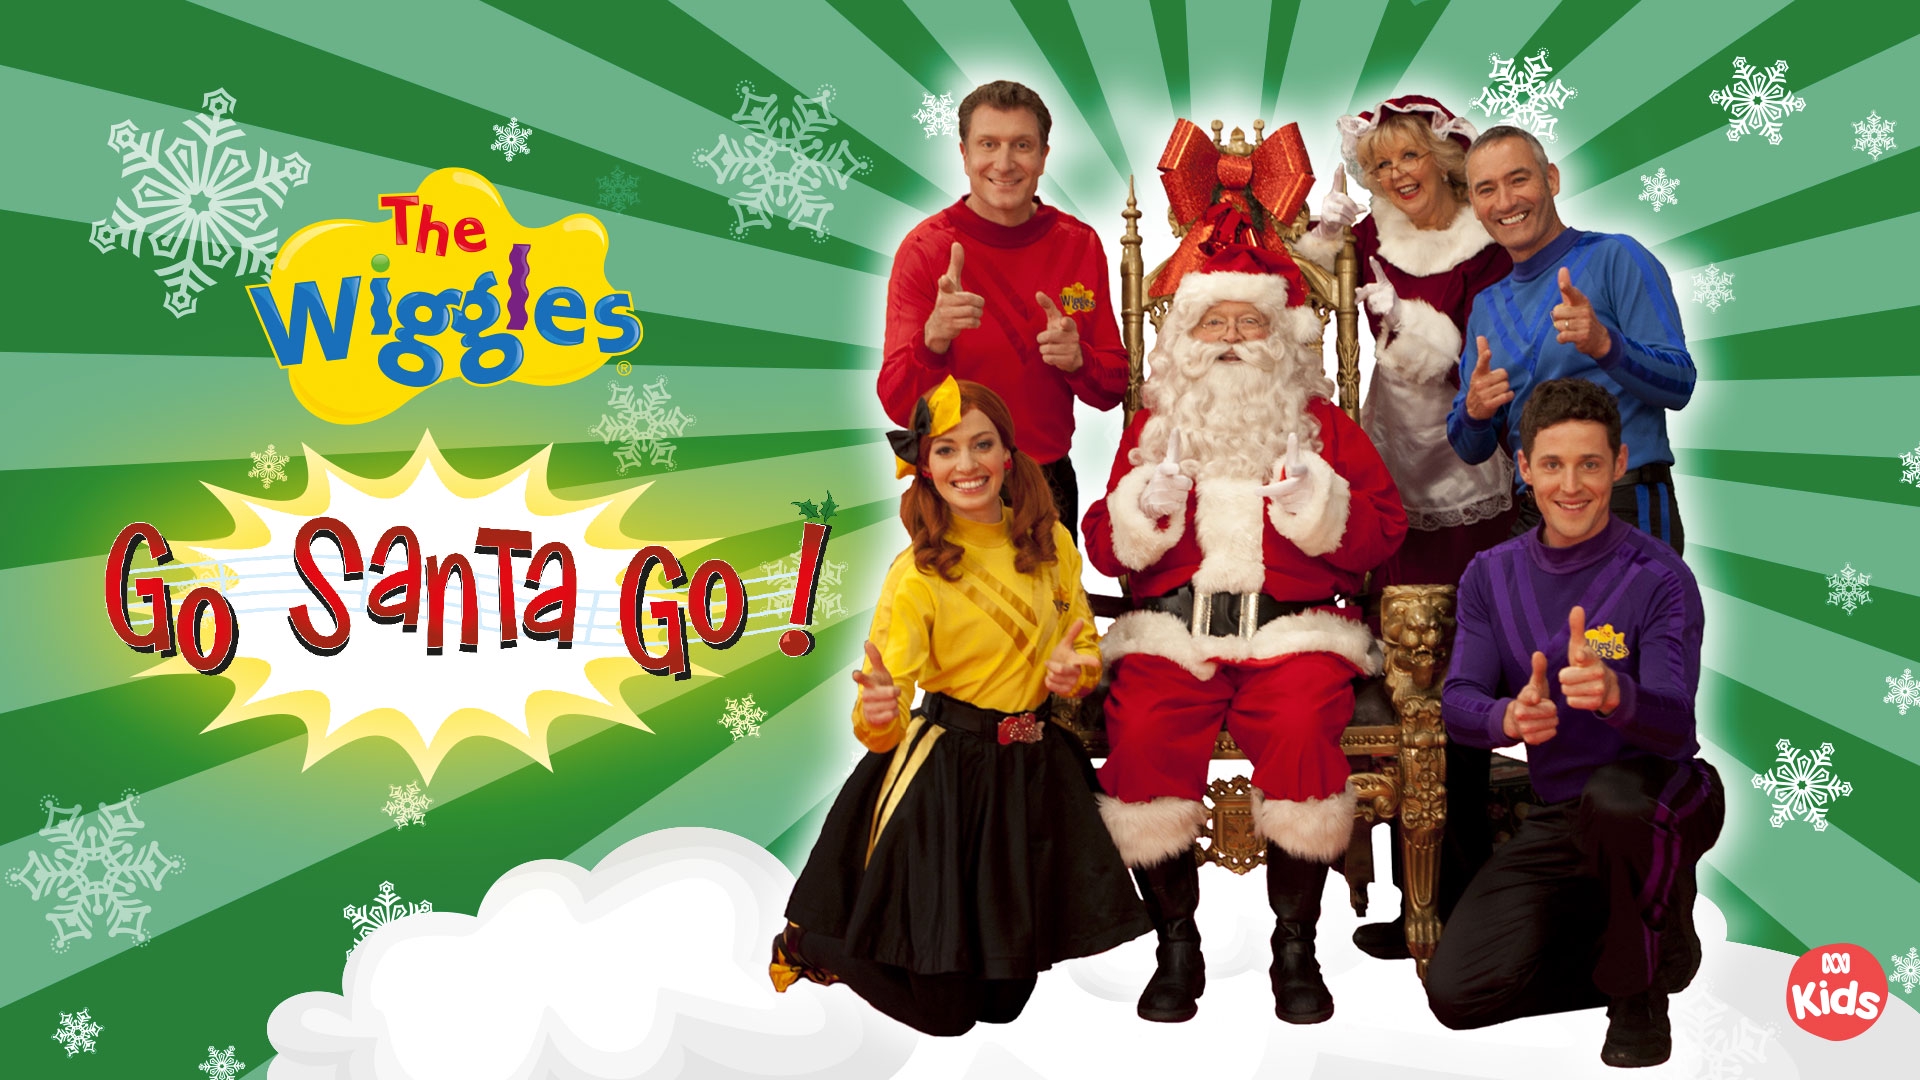 stream-the-wiggles-go-santa-go-online-download-and-watch-hd-movies-stan